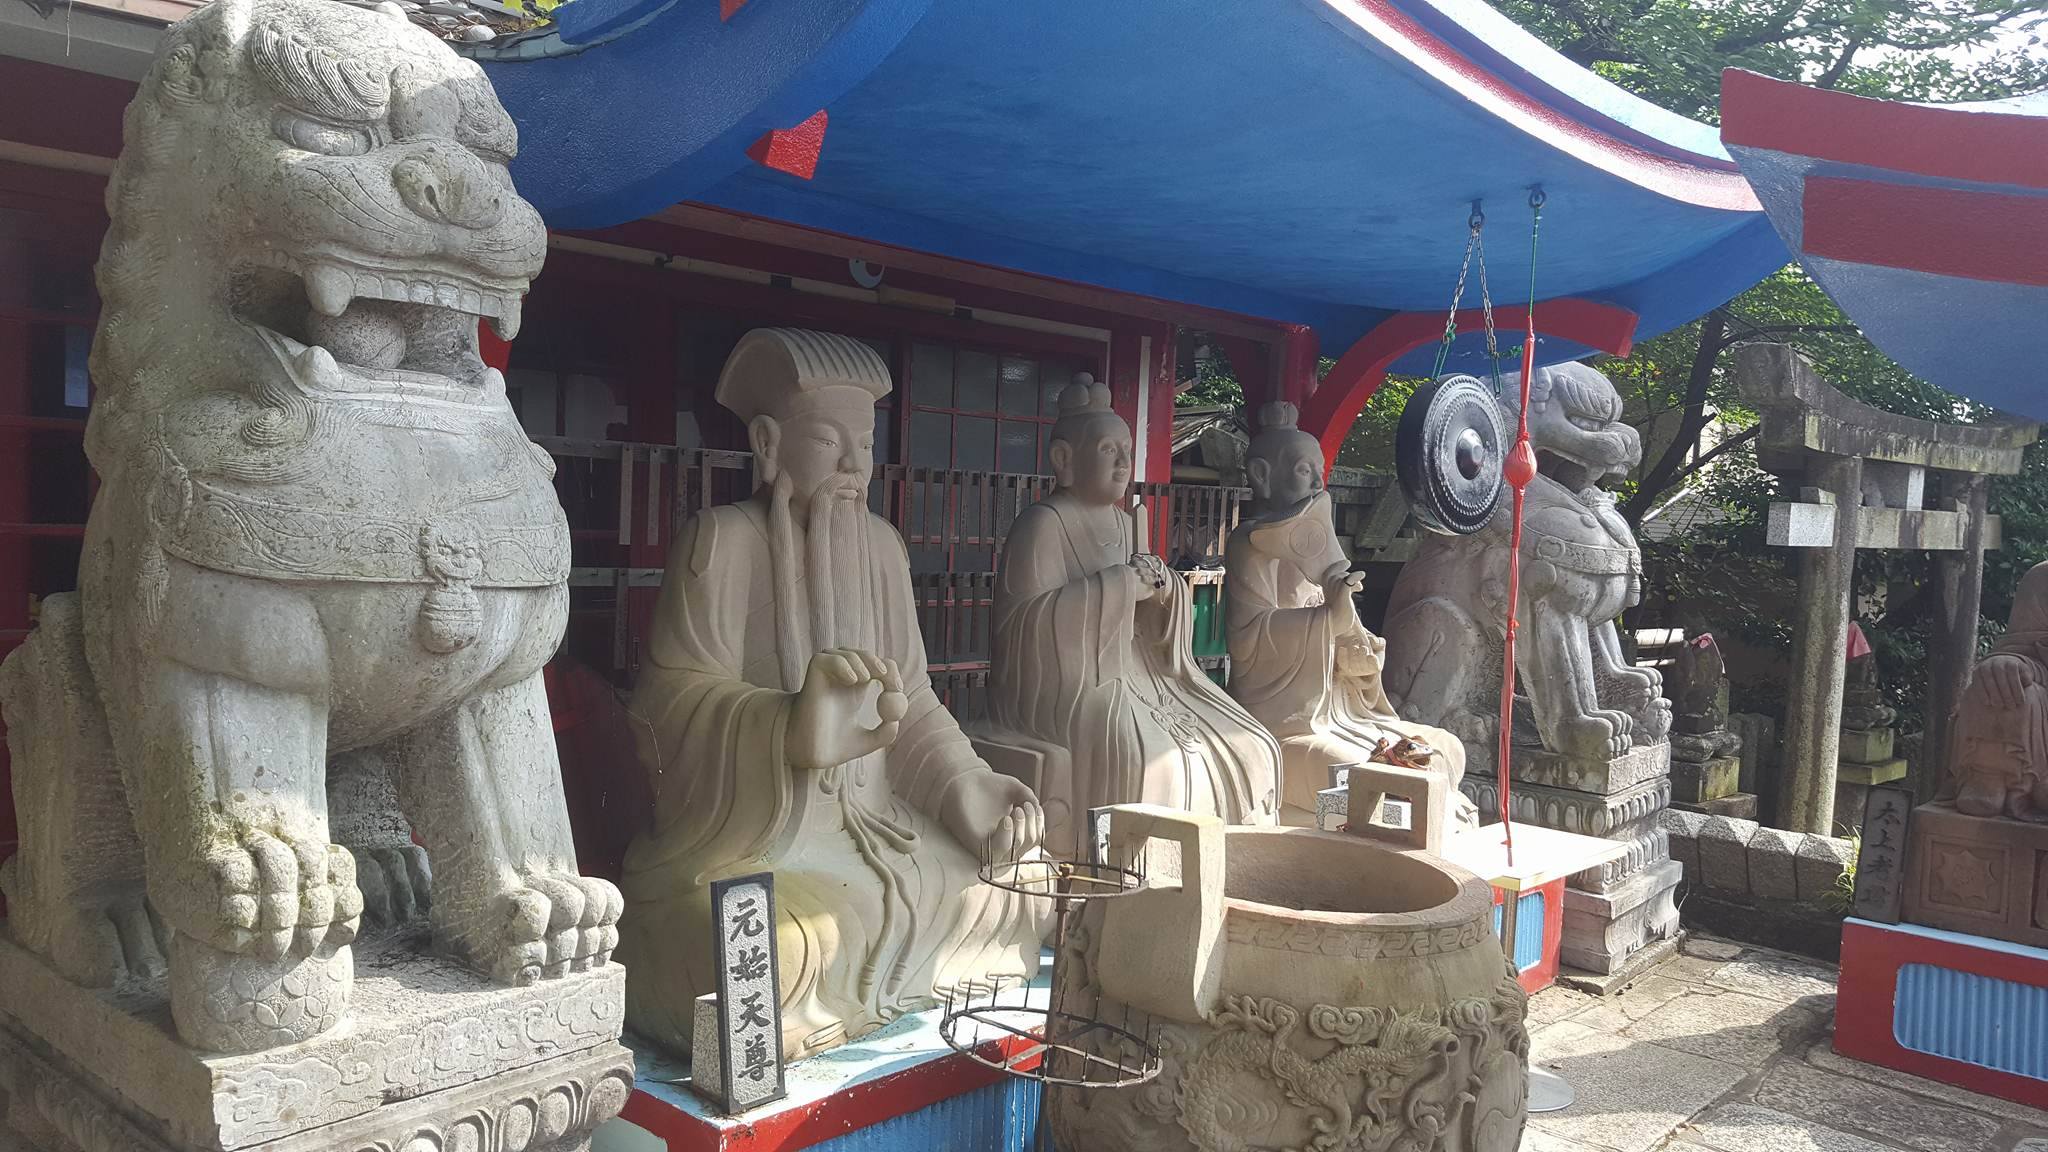 Hmm...are these three Eastern philosophers? I want to say it's Confucius, Lao Tzu, and Siddharta Gautama (Buddha) here, but I guess I would need investigate more closely to find out.